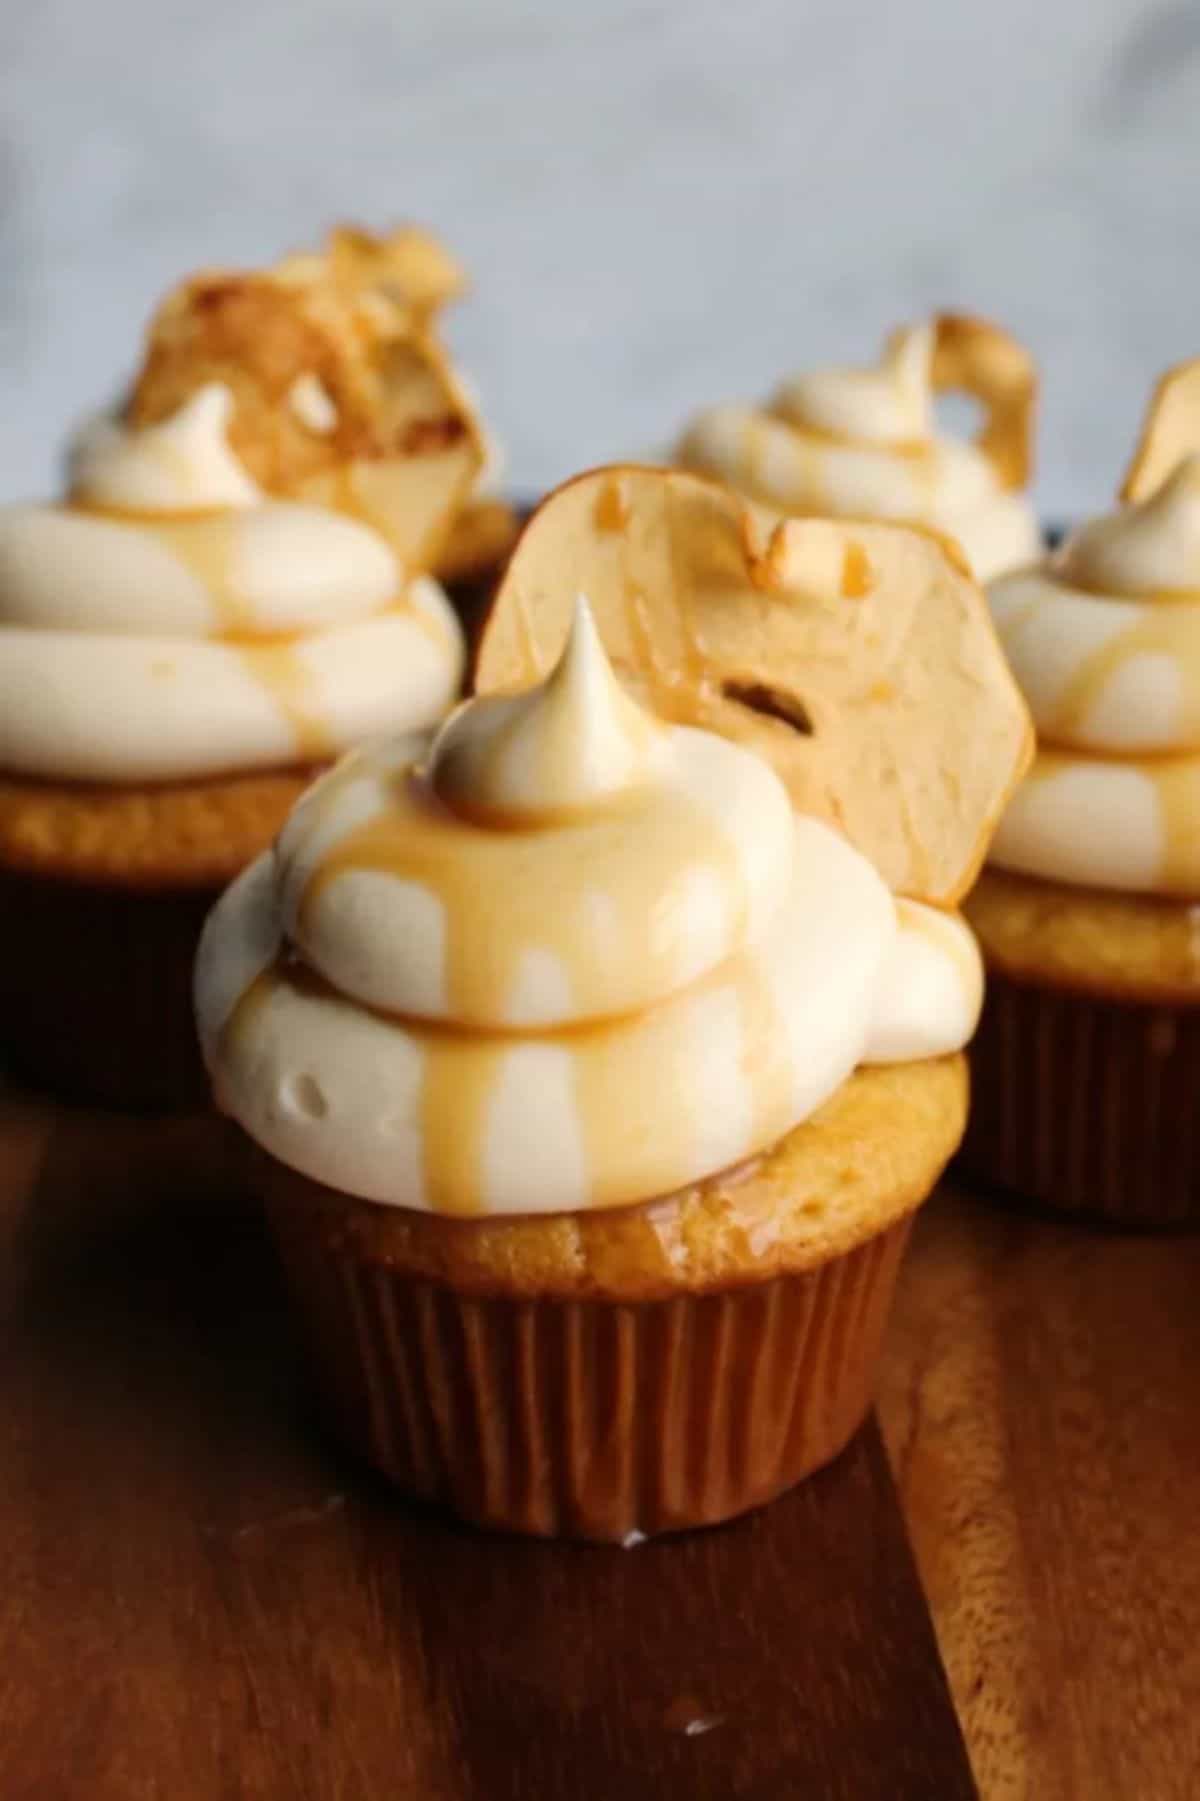 A bunch of cupcakes with Salted Caramel Cream Cheese Frosting.